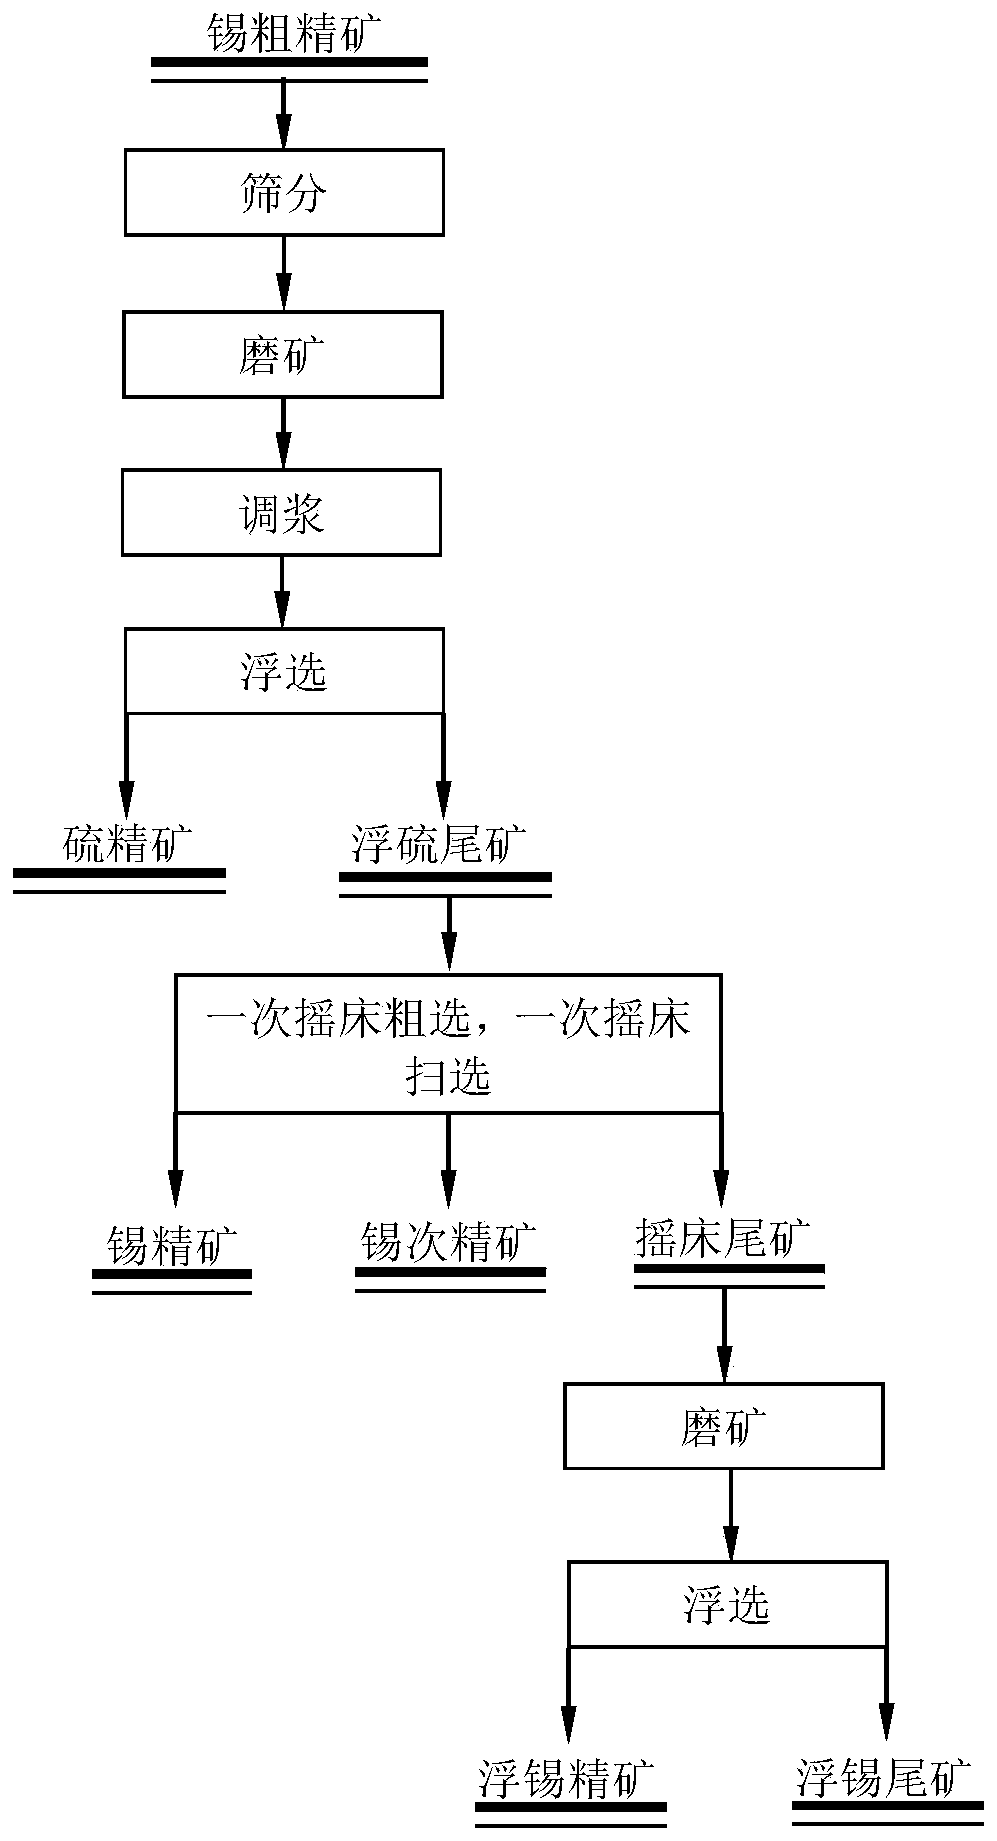 Separation method for high-arsenic high-sulfur tin rough concentrate